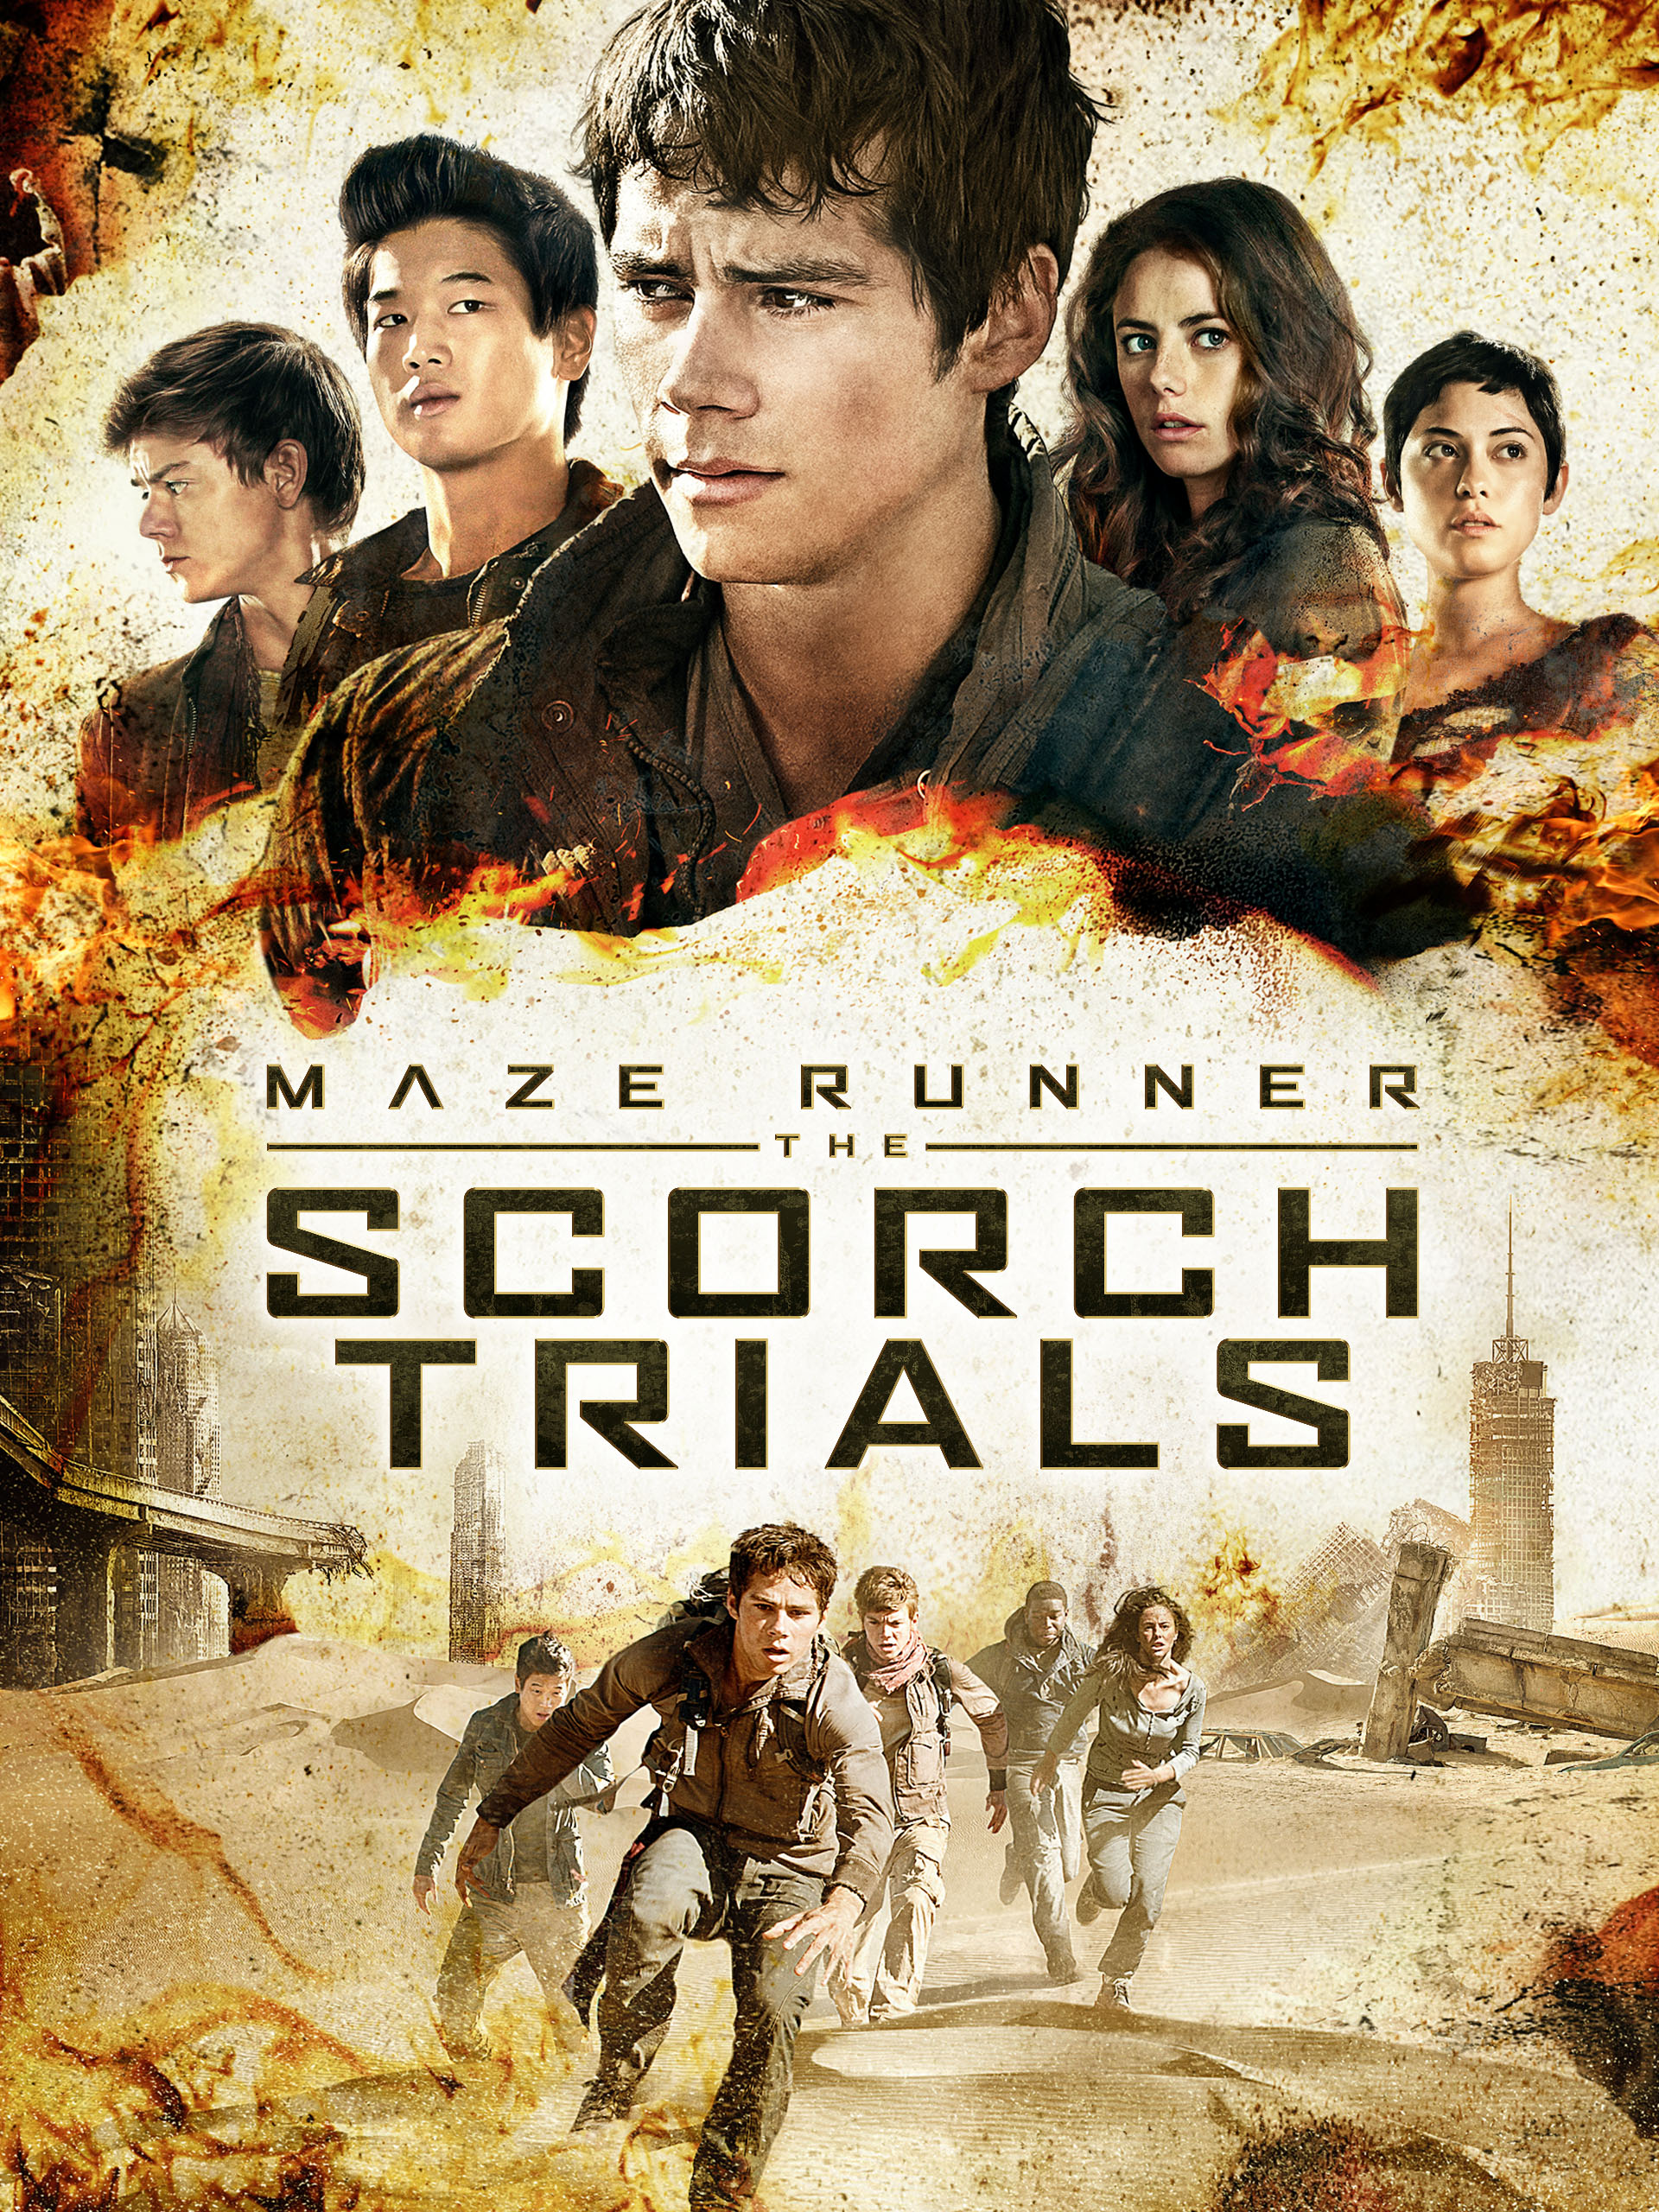 the maze runner 4 Release date, cast and everything you need to know no  trailer 